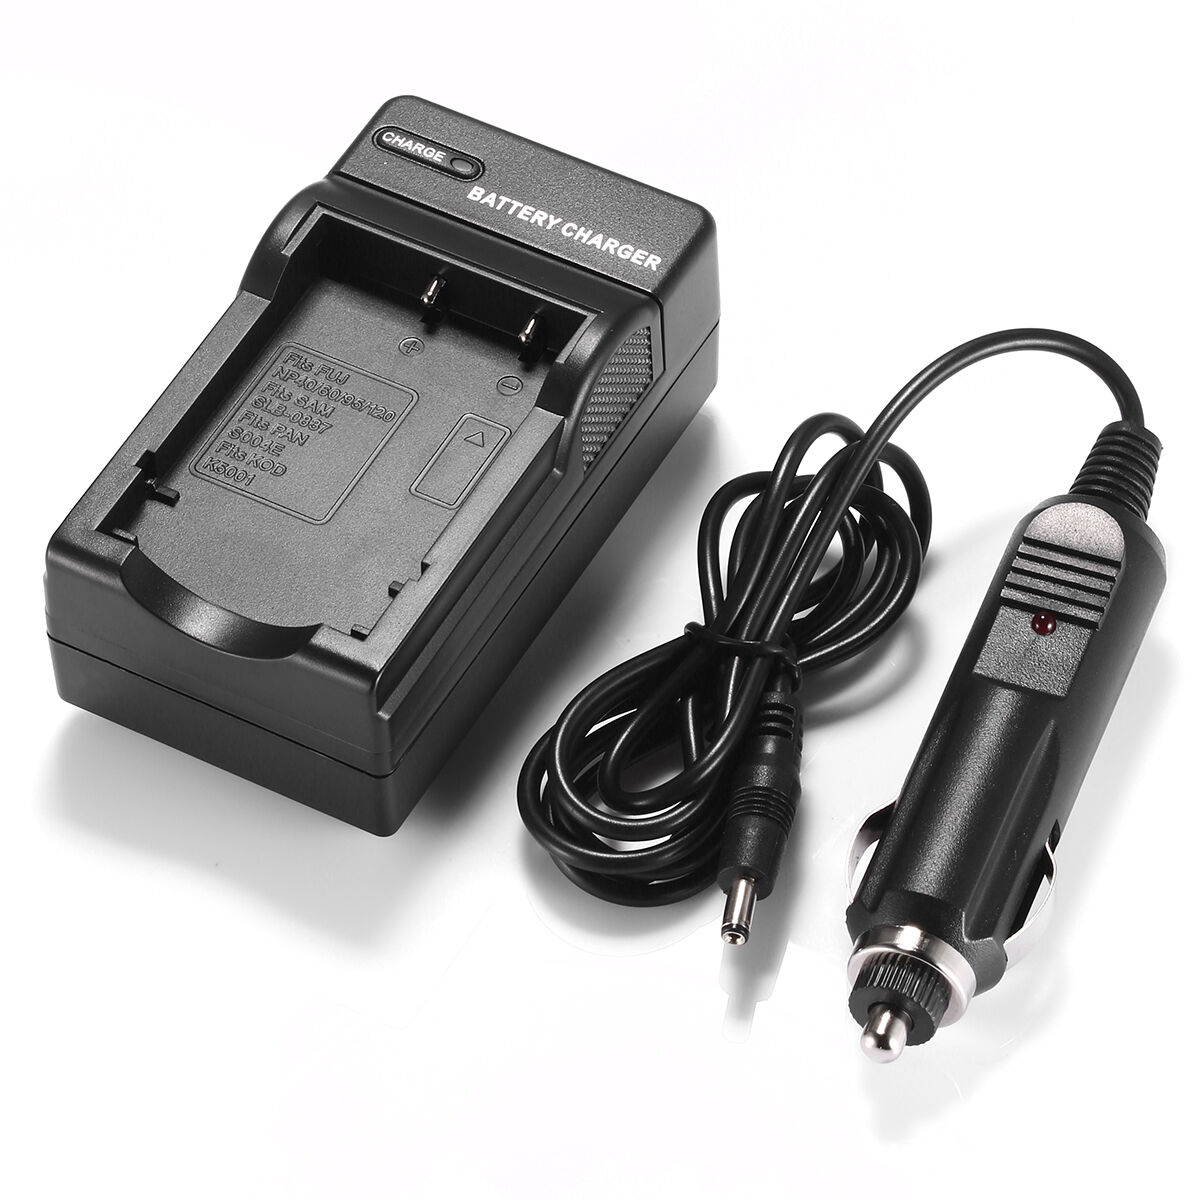 CASIO NP-100L battery charger